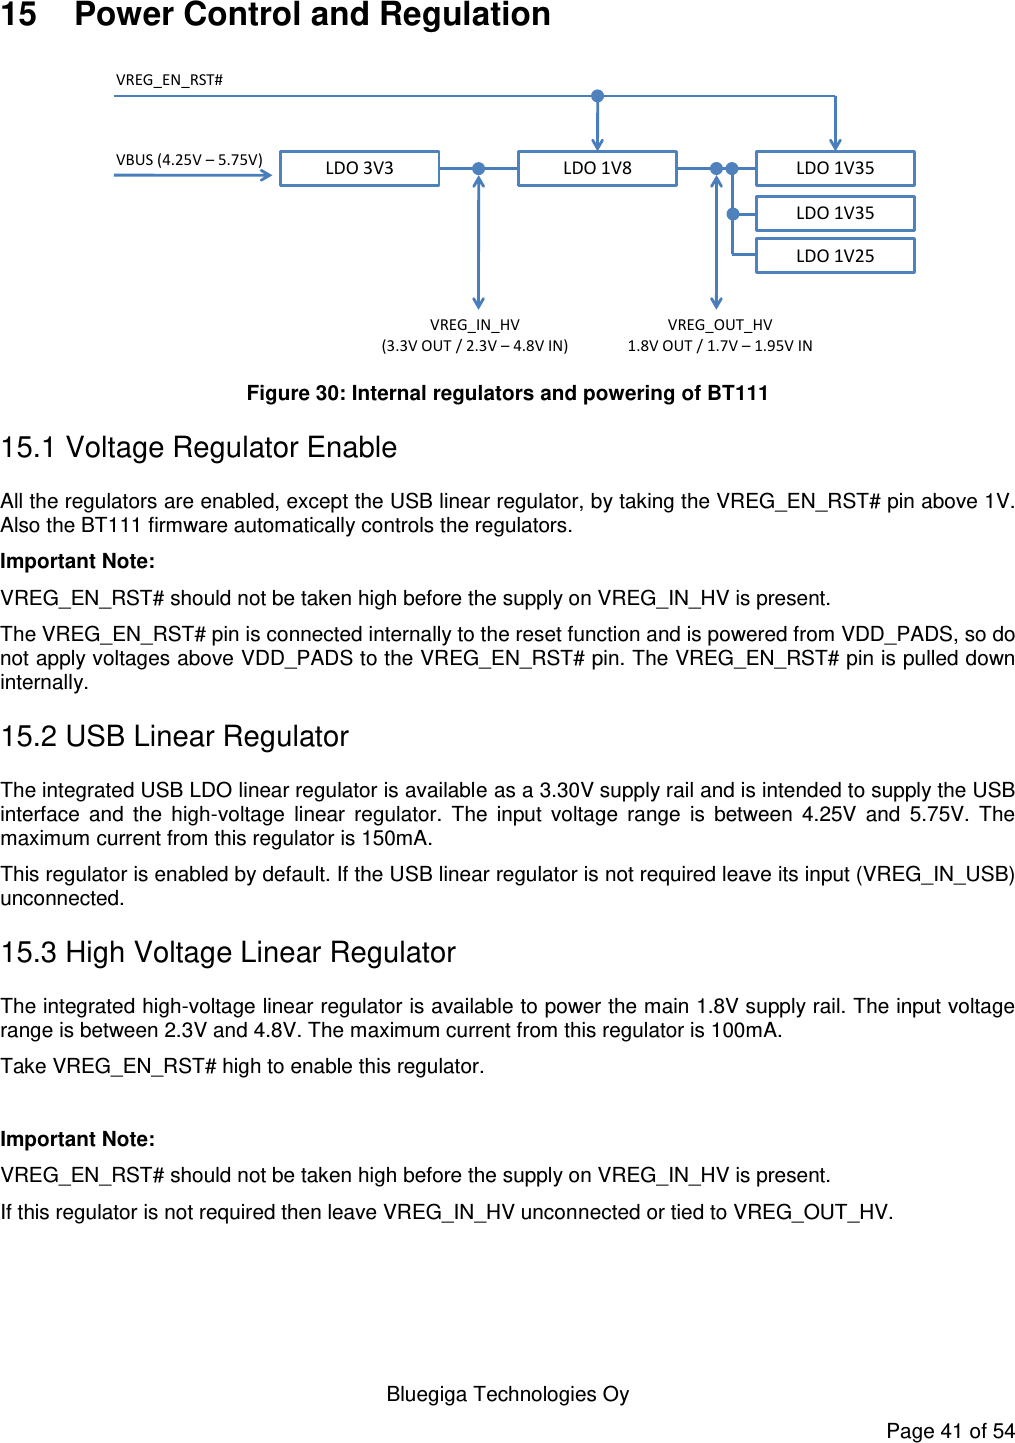    Bluegiga Technologies Oy Page 41 of 54 15  Power Control and Regulation LDO 3V3 LDO 1V8 LDO 1V35VBUS (4.25V –5.75V)VREG_IN_HV(3.3V OUT / 2.3V –4.8V IN)VREG_OUT_HV1.8V OUT / 1.7V –1.95V INVREG_EN_RST#LDO 1V35LDO 1V25 Figure 30: Internal regulators and powering of BT111 15.1 Voltage Regulator Enable All the regulators are enabled, except the USB linear regulator, by taking the VREG_EN_RST# pin above 1V. Also the BT111 firmware automatically controls the regulators. Important Note: VREG_EN_RST# should not be taken high before the supply on VREG_IN_HV is present. The VREG_EN_RST# pin is connected internally to the reset function and is powered from VDD_PADS, so do not apply voltages above VDD_PADS to the VREG_EN_RST# pin. The VREG_EN_RST# pin is pulled down internally. 15.2 USB Linear Regulator The integrated USB LDO linear regulator is available as a 3.30V supply rail and is intended to supply the USB interface  and  the  high-voltage  linear  regulator.  The  input  voltage  range  is  between  4.25V  and  5.75V.  The maximum current from this regulator is 150mA. This regulator is enabled by default. If the USB linear regulator is not required leave its input (VREG_IN_USB) unconnected. 15.3 High Voltage Linear Regulator The integrated high-voltage linear regulator is available to power the main 1.8V supply rail. The input voltage range is between 2.3V and 4.8V. The maximum current from this regulator is 100mA. Take VREG_EN_RST# high to enable this regulator.  Important Note: VREG_EN_RST# should not be taken high before the supply on VREG_IN_HV is present. If this regulator is not required then leave VREG_IN_HV unconnected or tied to VREG_OUT_HV. 